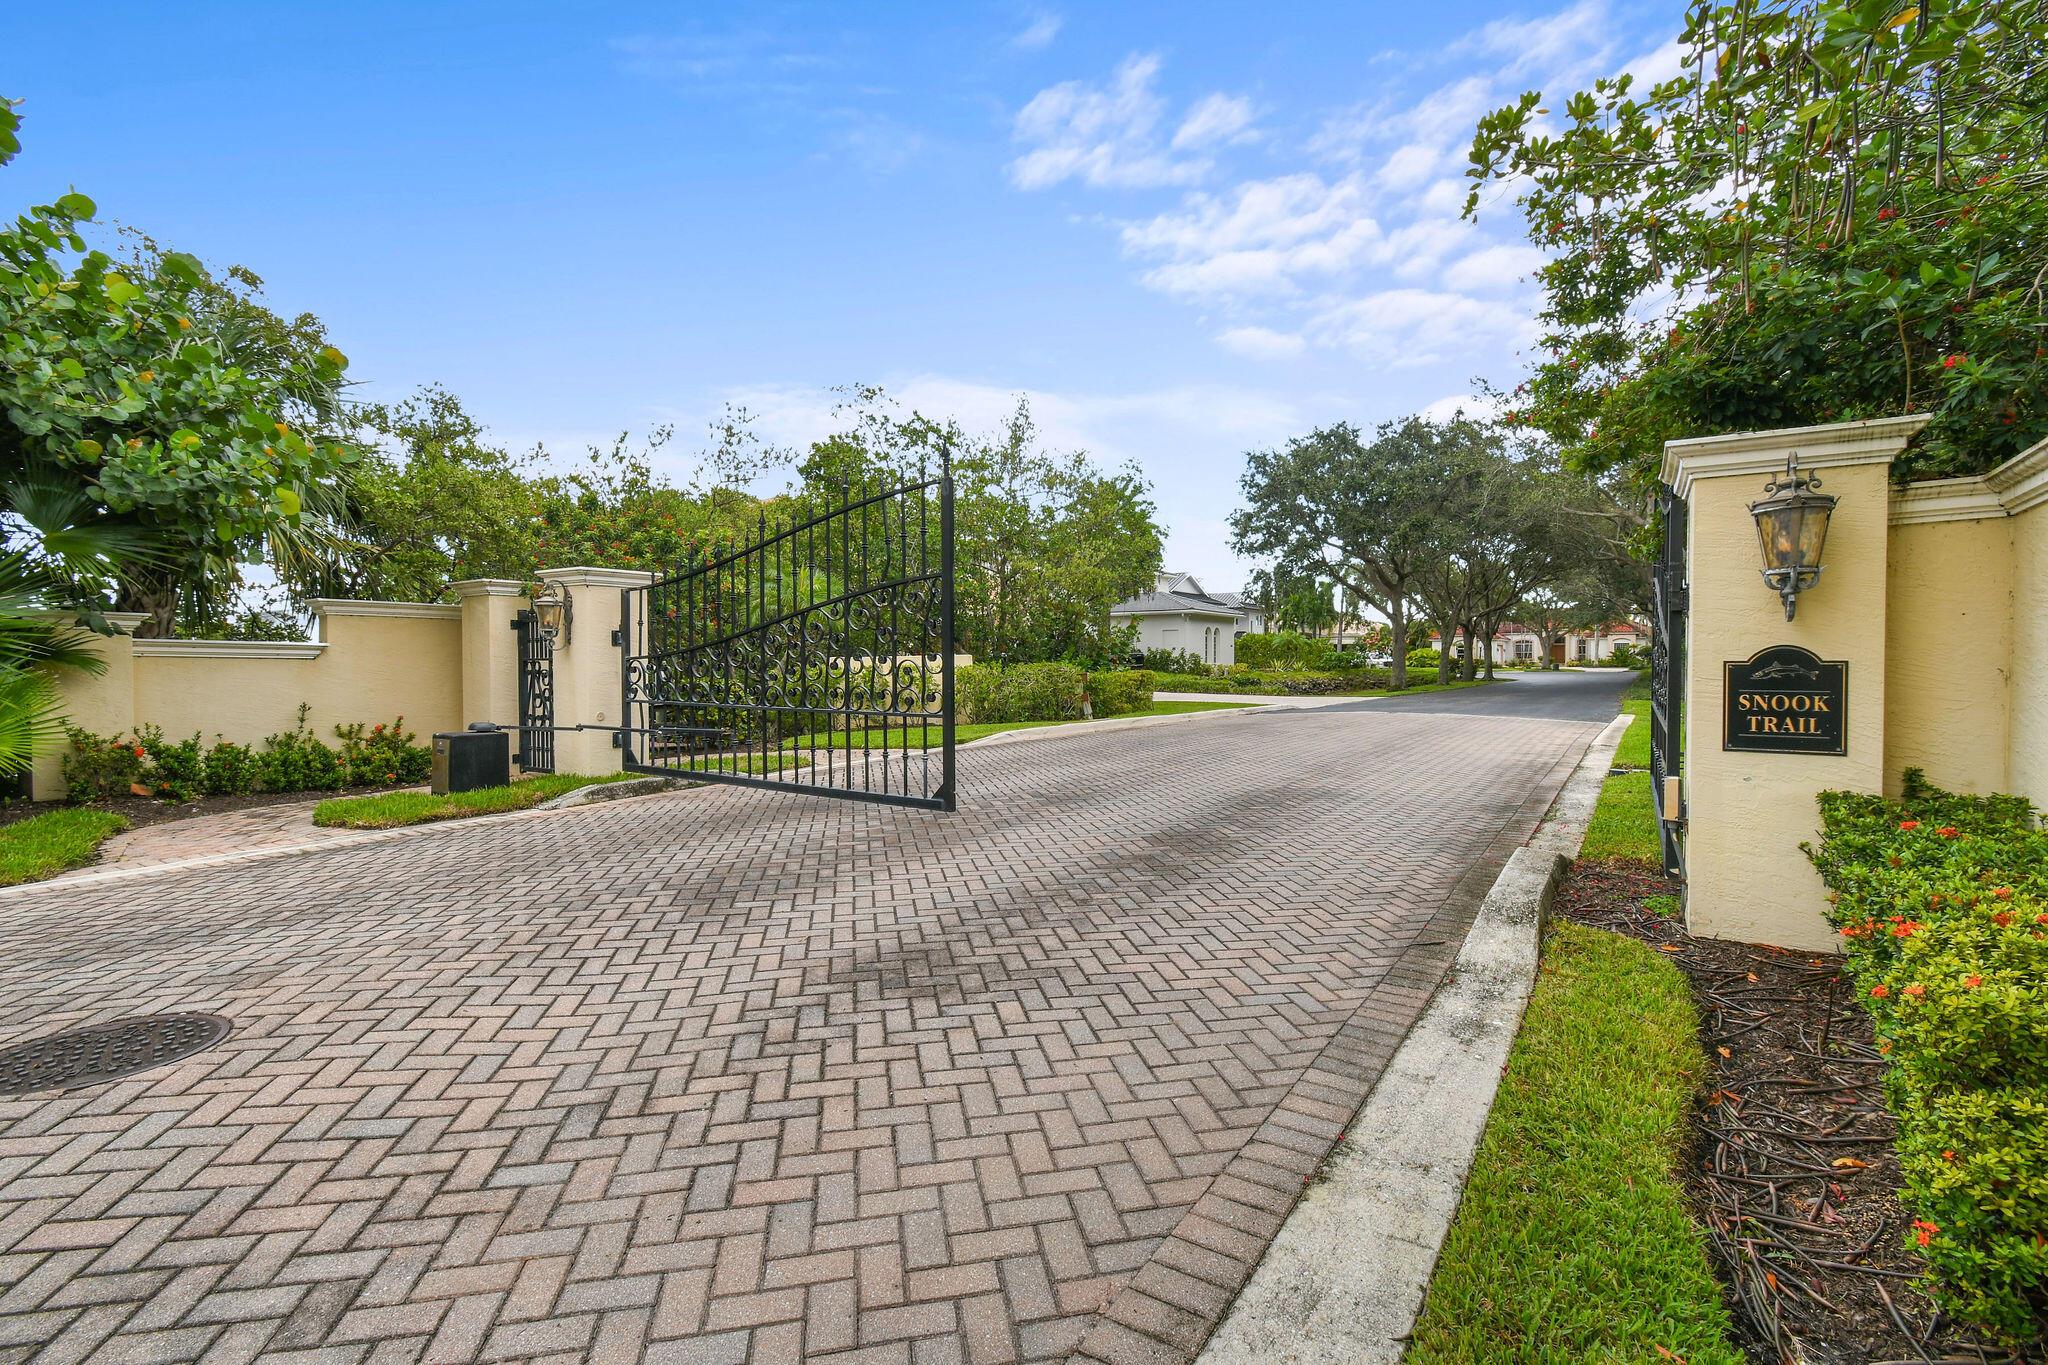 2425 Snook Trail